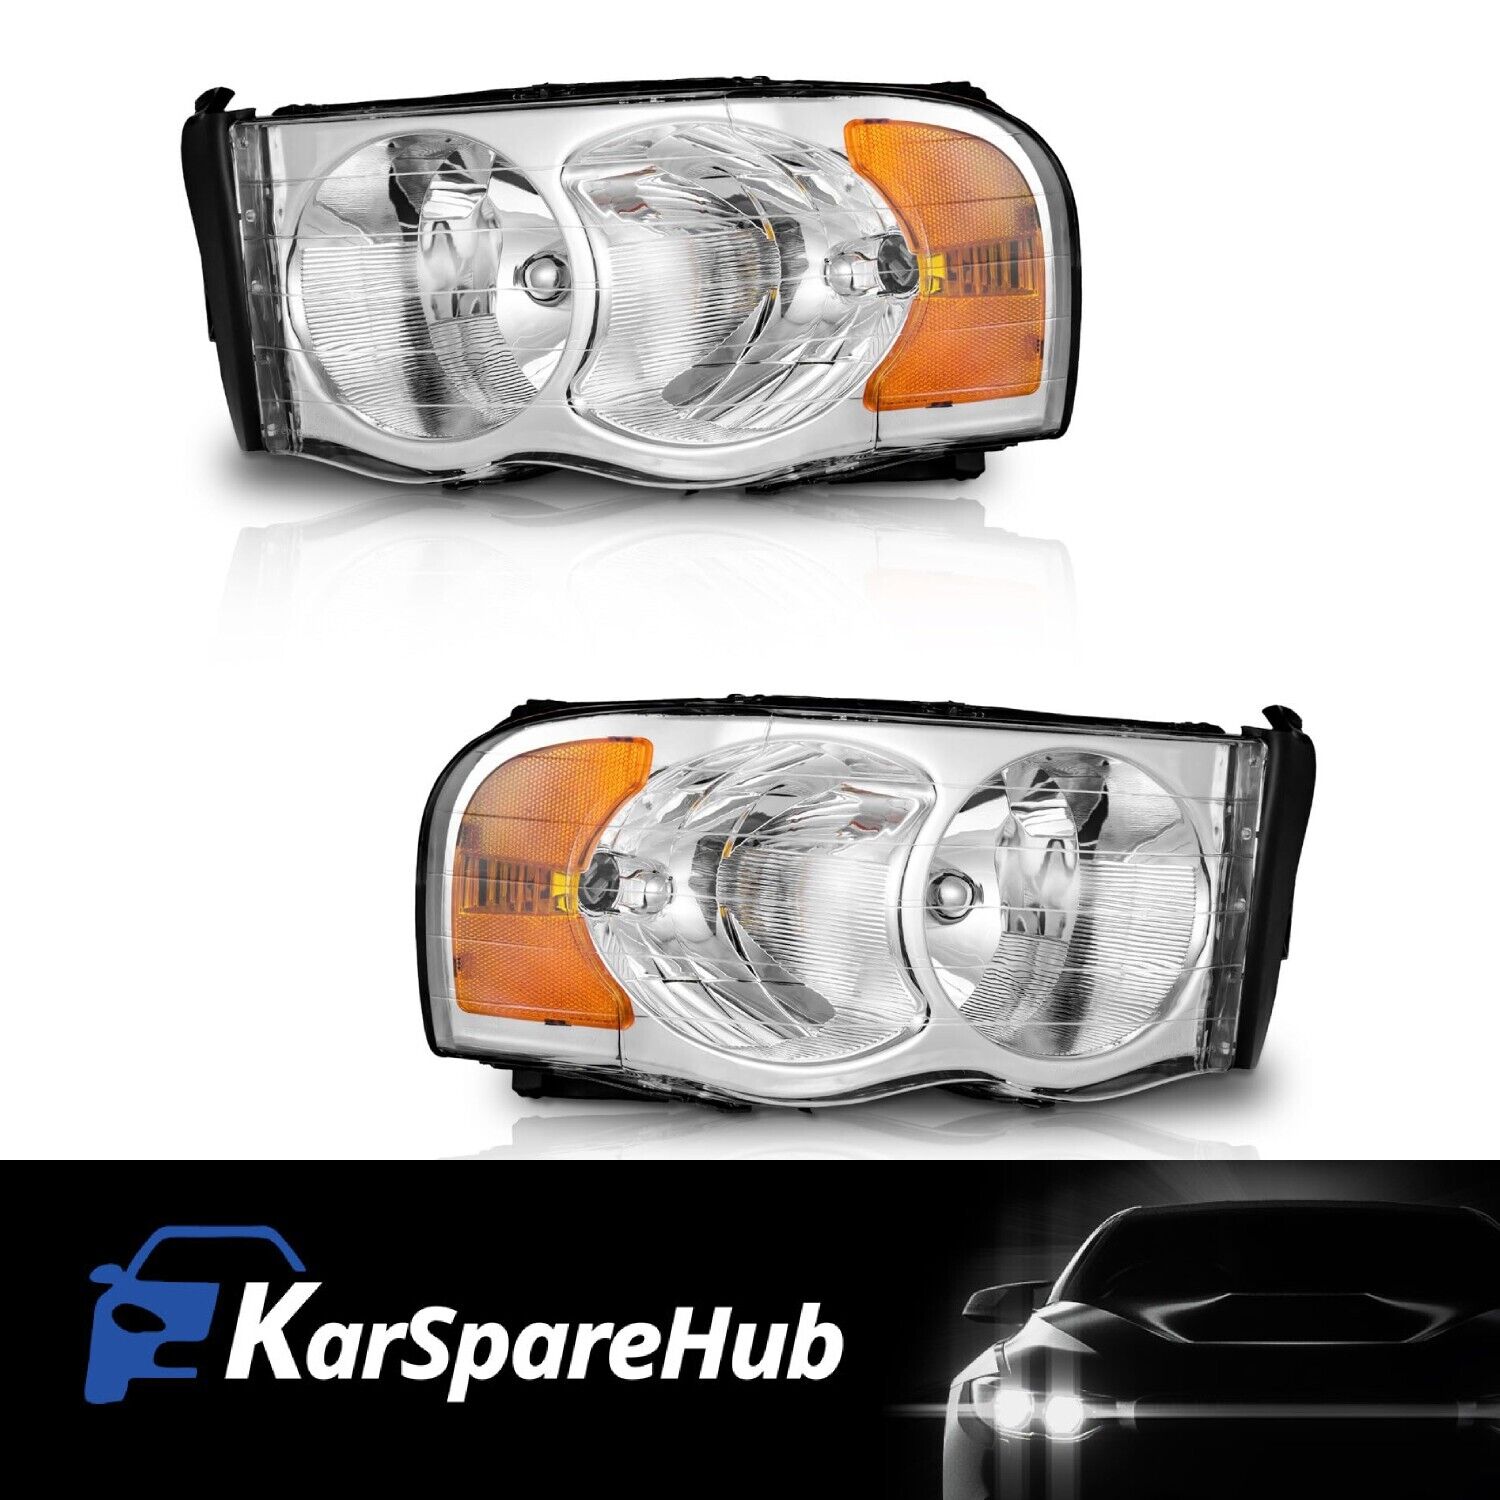 Headlights Assembly For 2002-2005 Dodge Ram 1500 2500 3500 Headlamps Left+Right